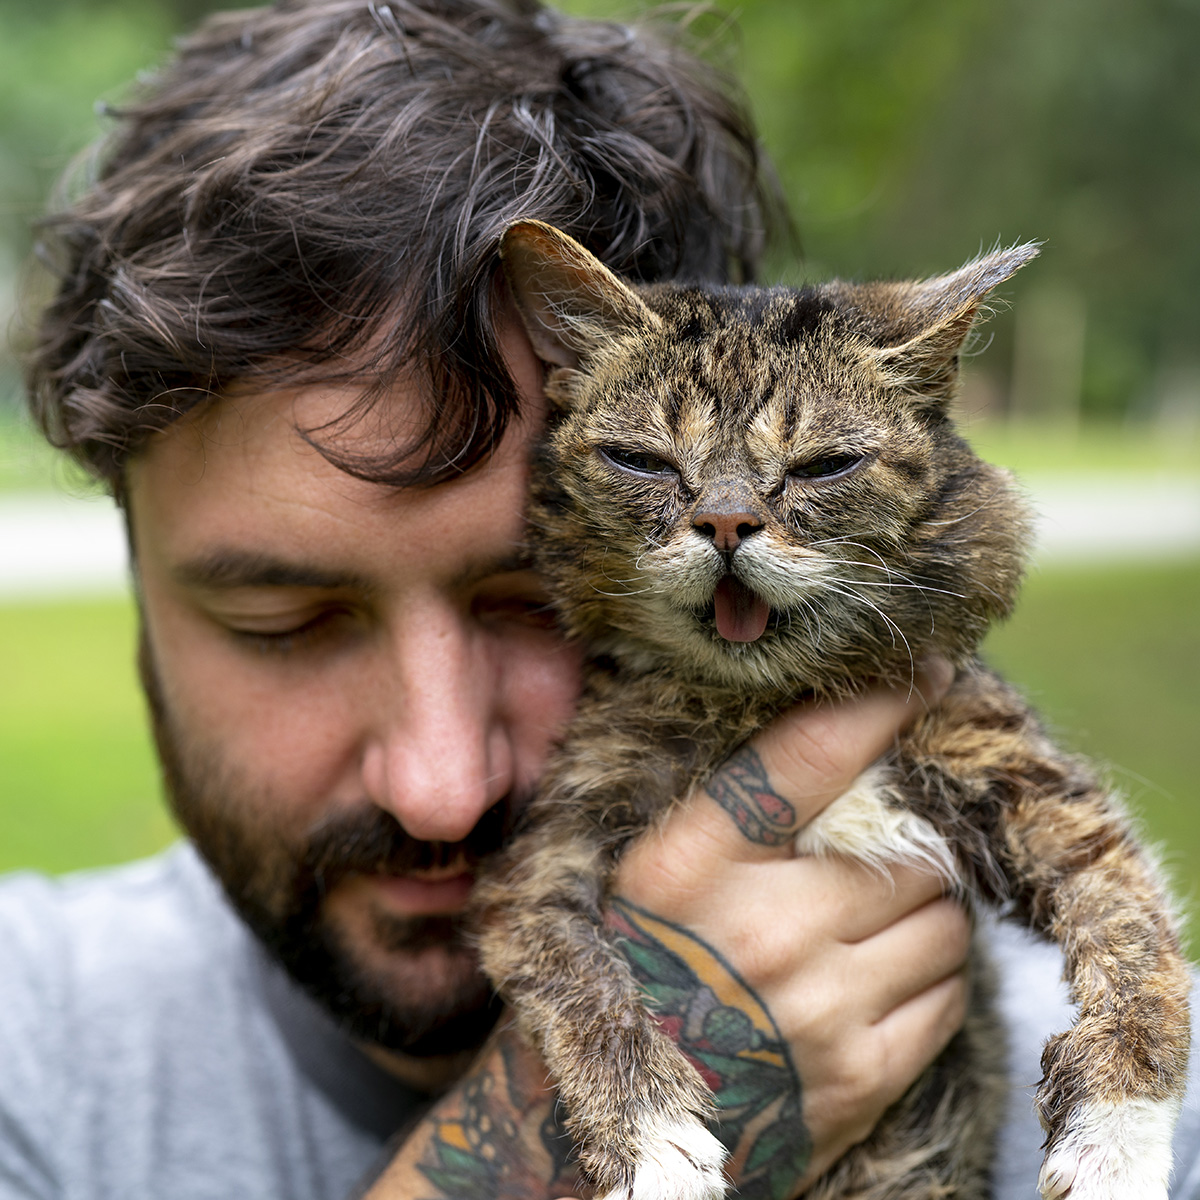 3 years ago today, BUB left planet Earth- mailchi.mp/lilbub/hi-toda…